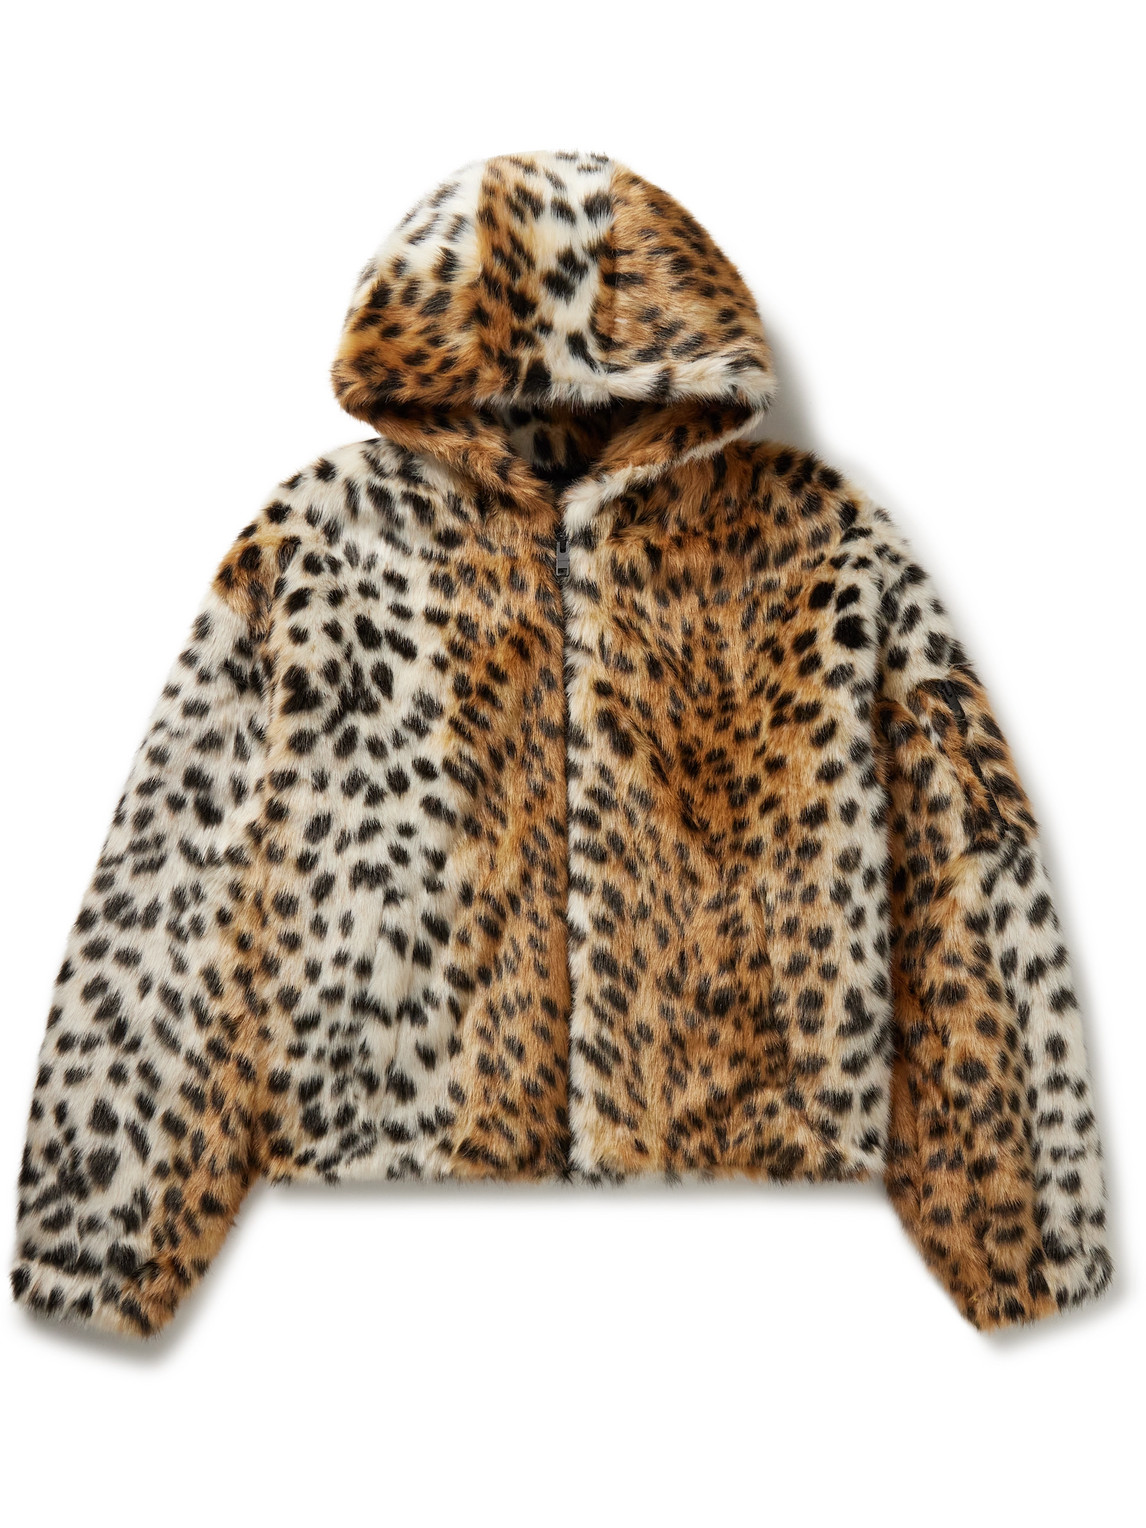 Givenchy Cropped Cheetah-Print Faux Fur Hooded Bomber Jacket